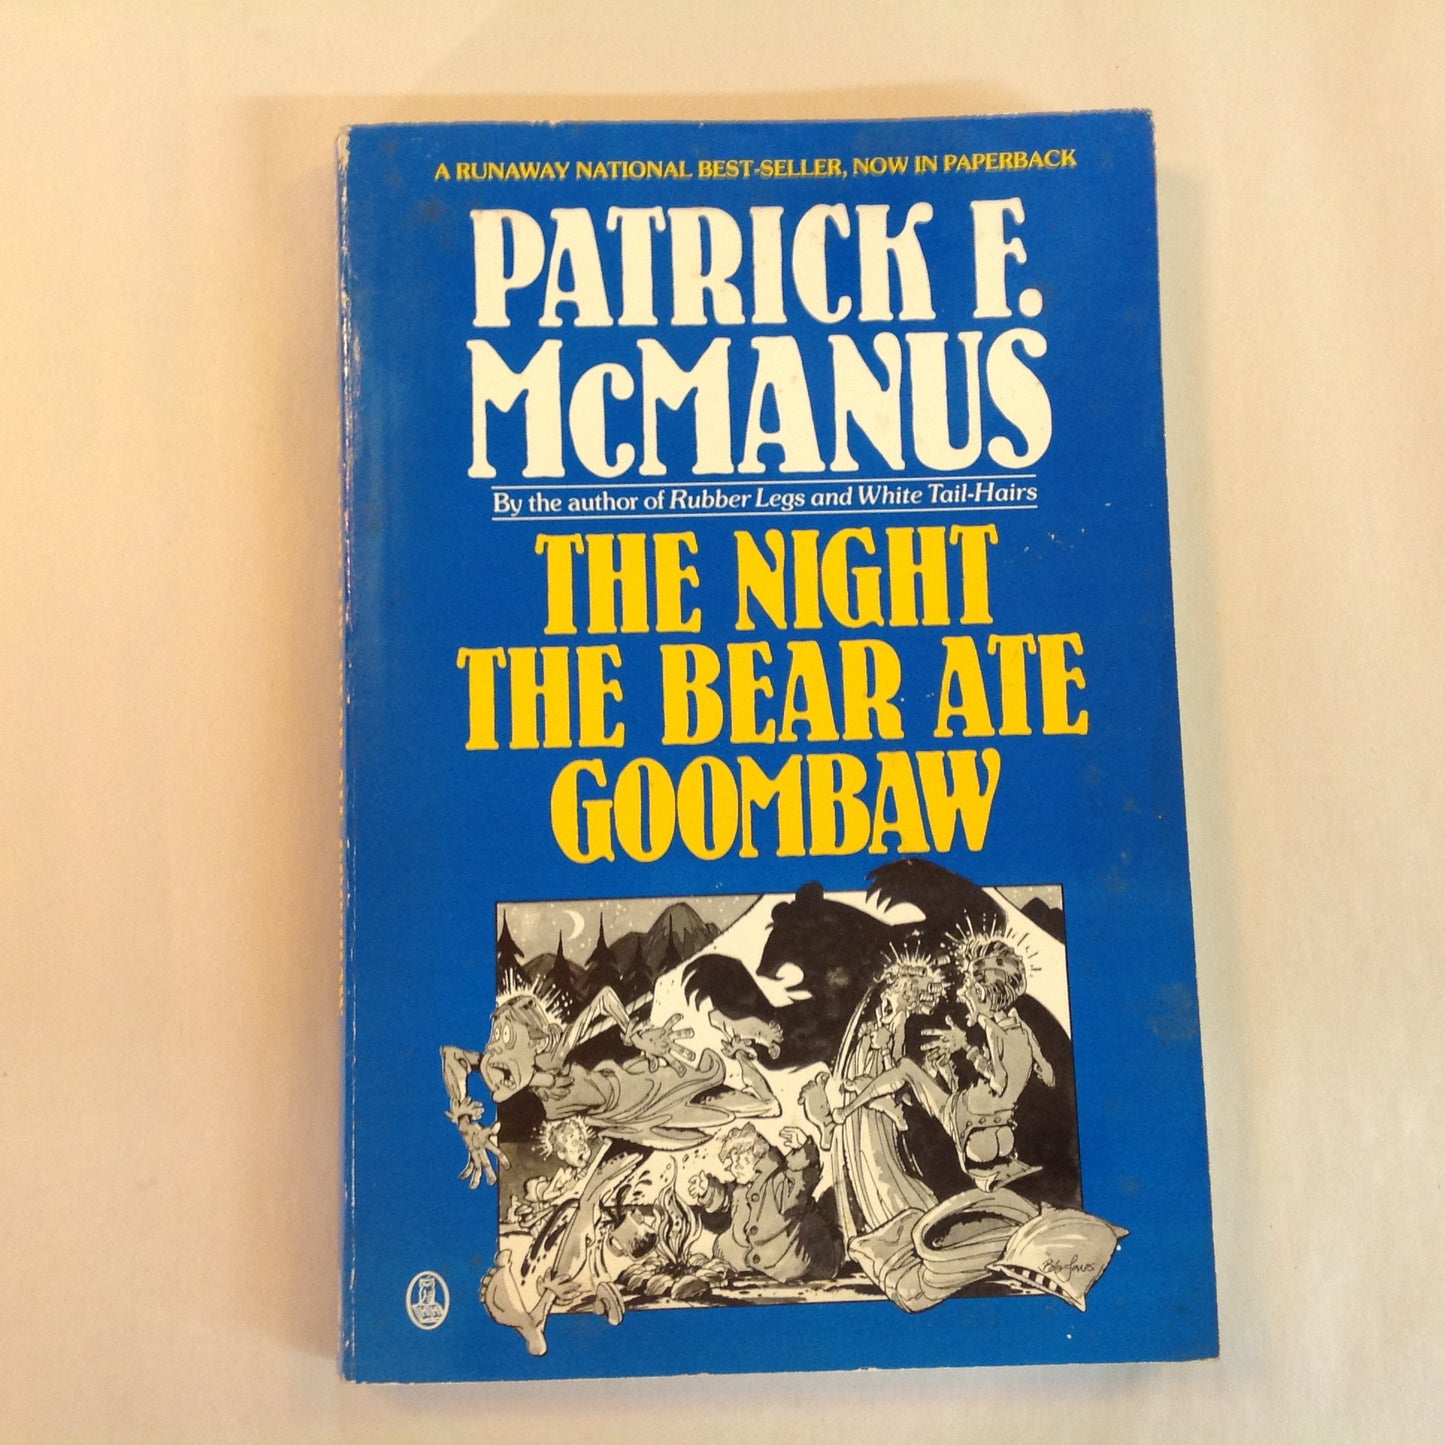 Vintage 1990 Paperback The Night the Bear Ate Goombaw Patrick F. McManus First Edition